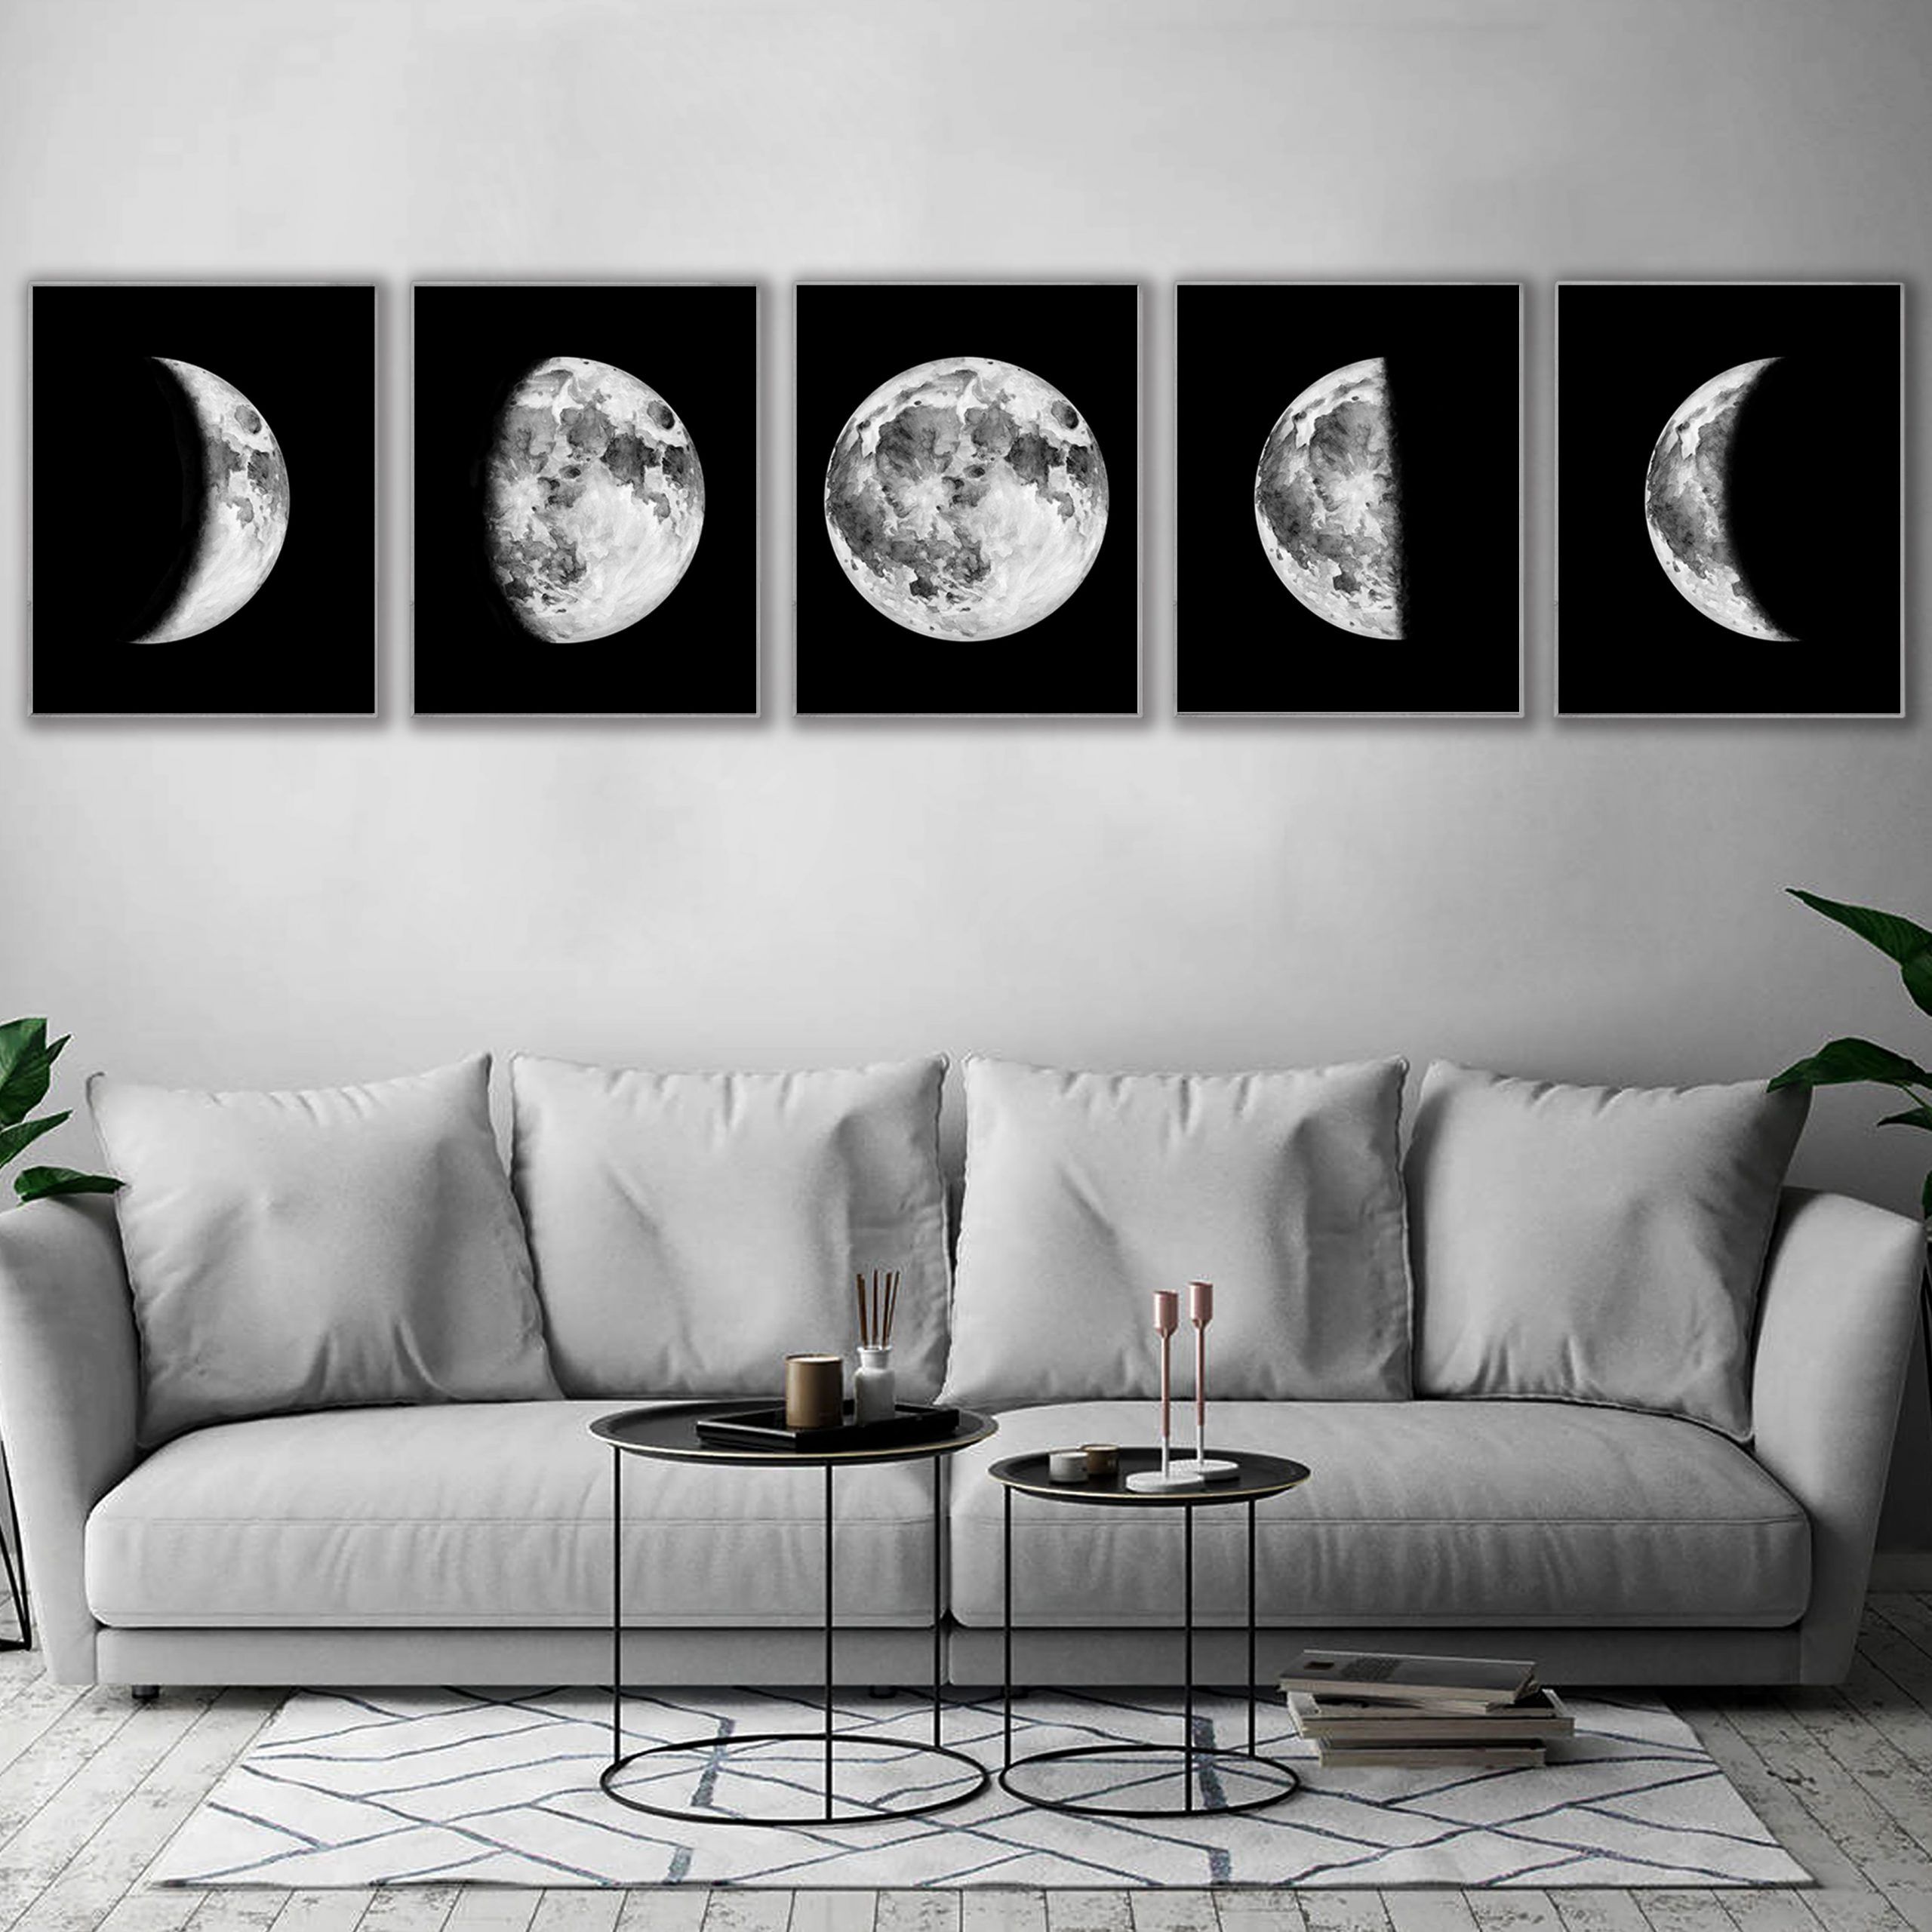 Moon Phase Wall Hanging Black And White Art Printable – Etsy | Wall Decor  Bedroom, Wall Decor Living Room, White Wall Decor Intended For The Moon Wall Art (View 3 of 15)